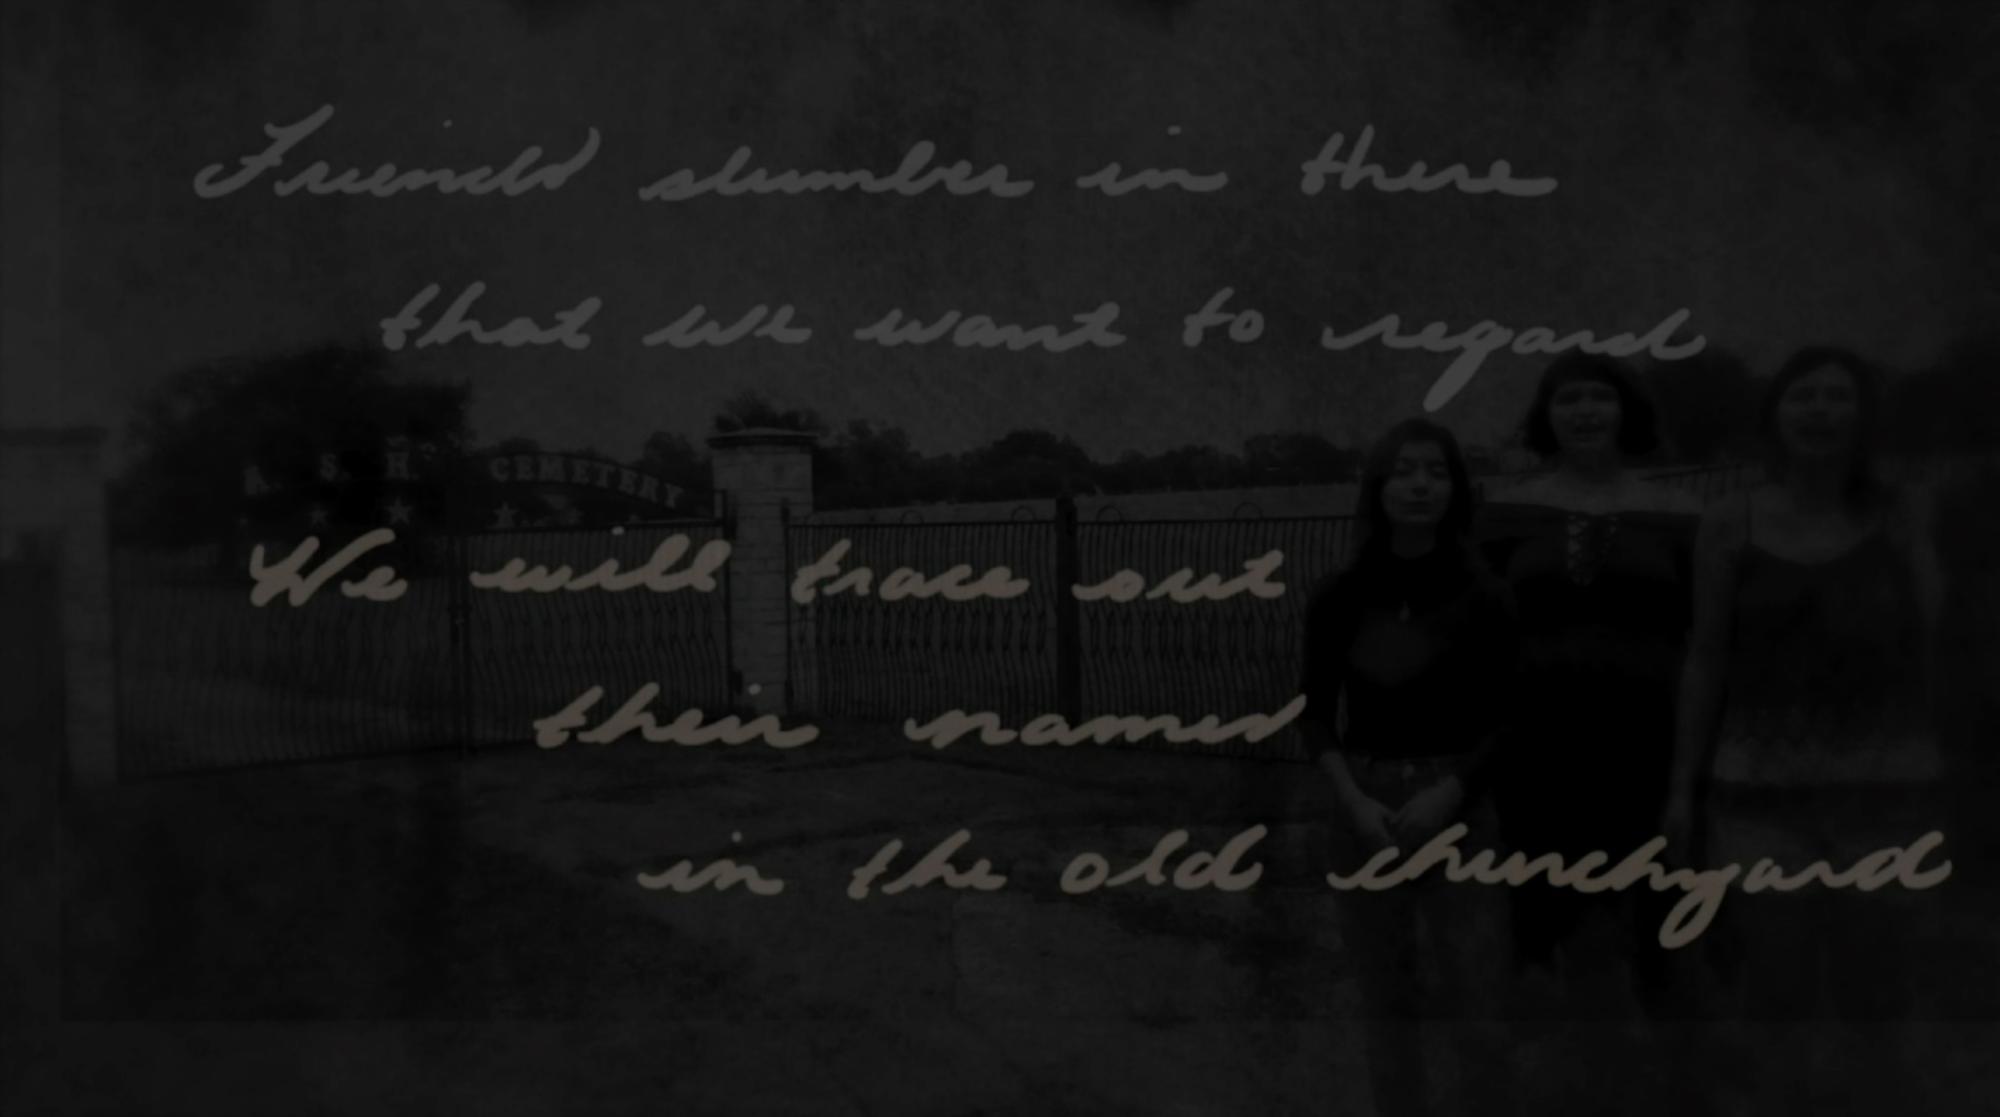 a darkened image of three ensemble members standing in front of a gate, with the words "Friends slumber in there that we want to regard. We will trace out their names in the old churchyard."